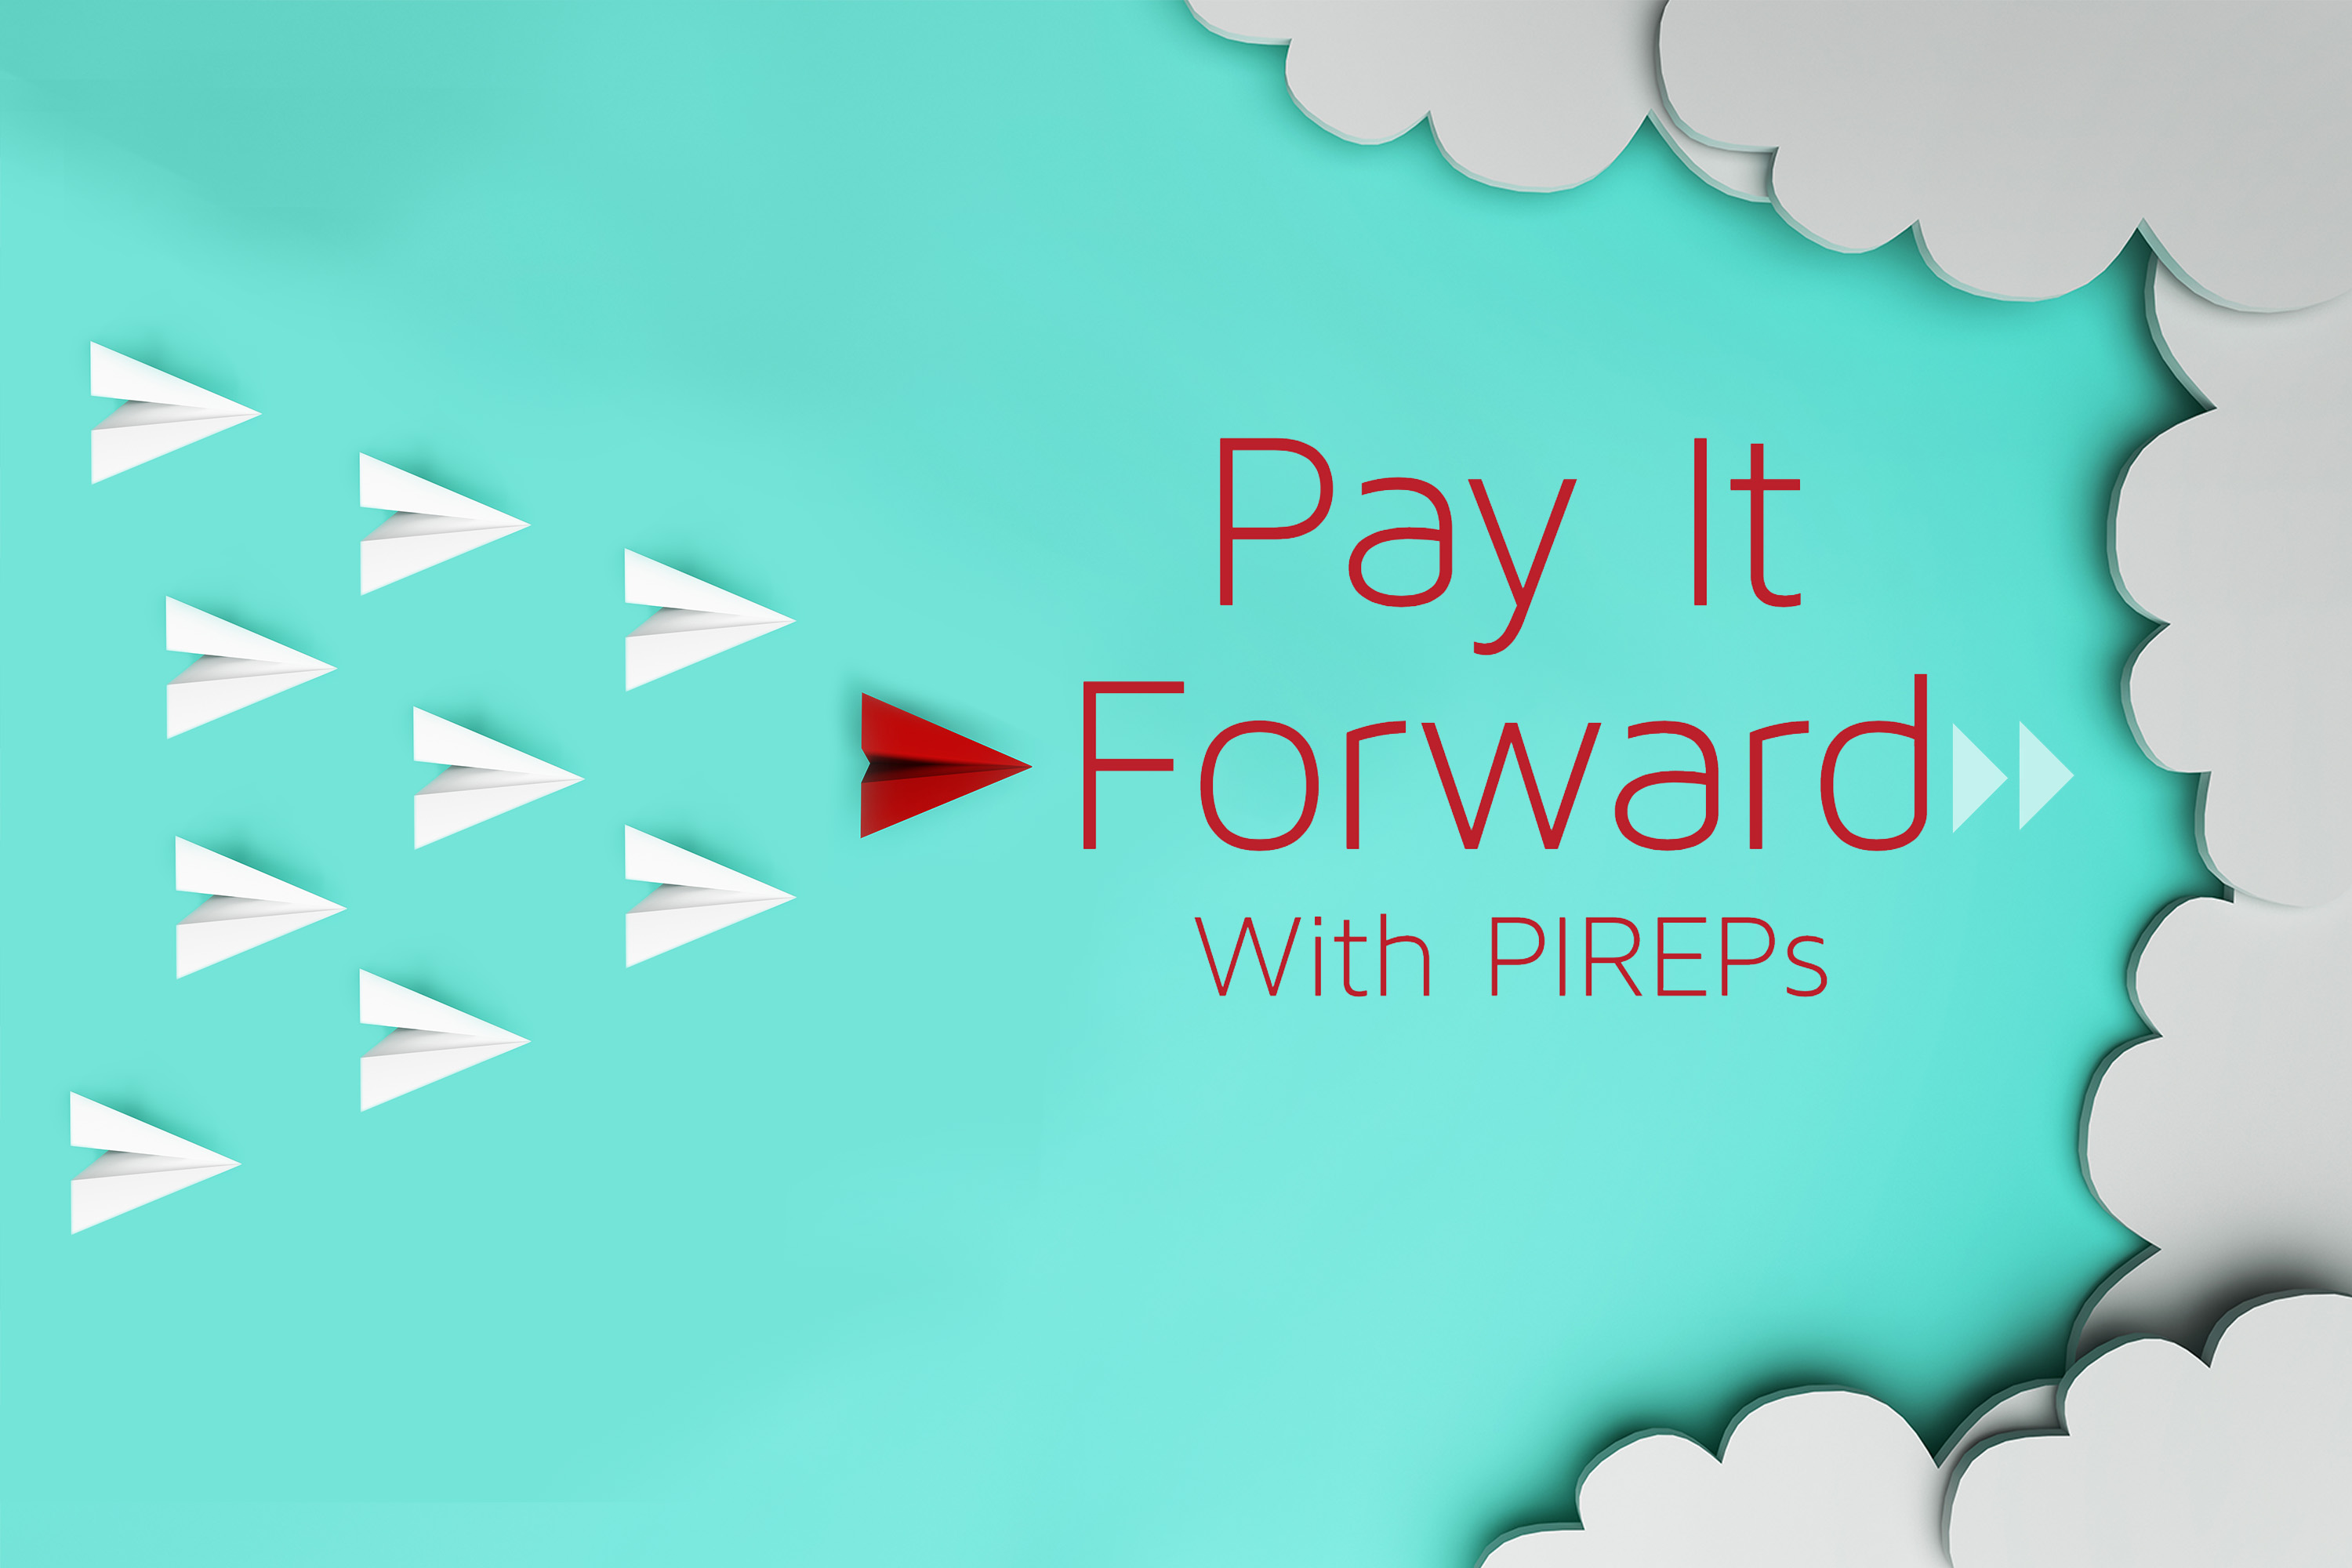 Pay it forward with PIREPS